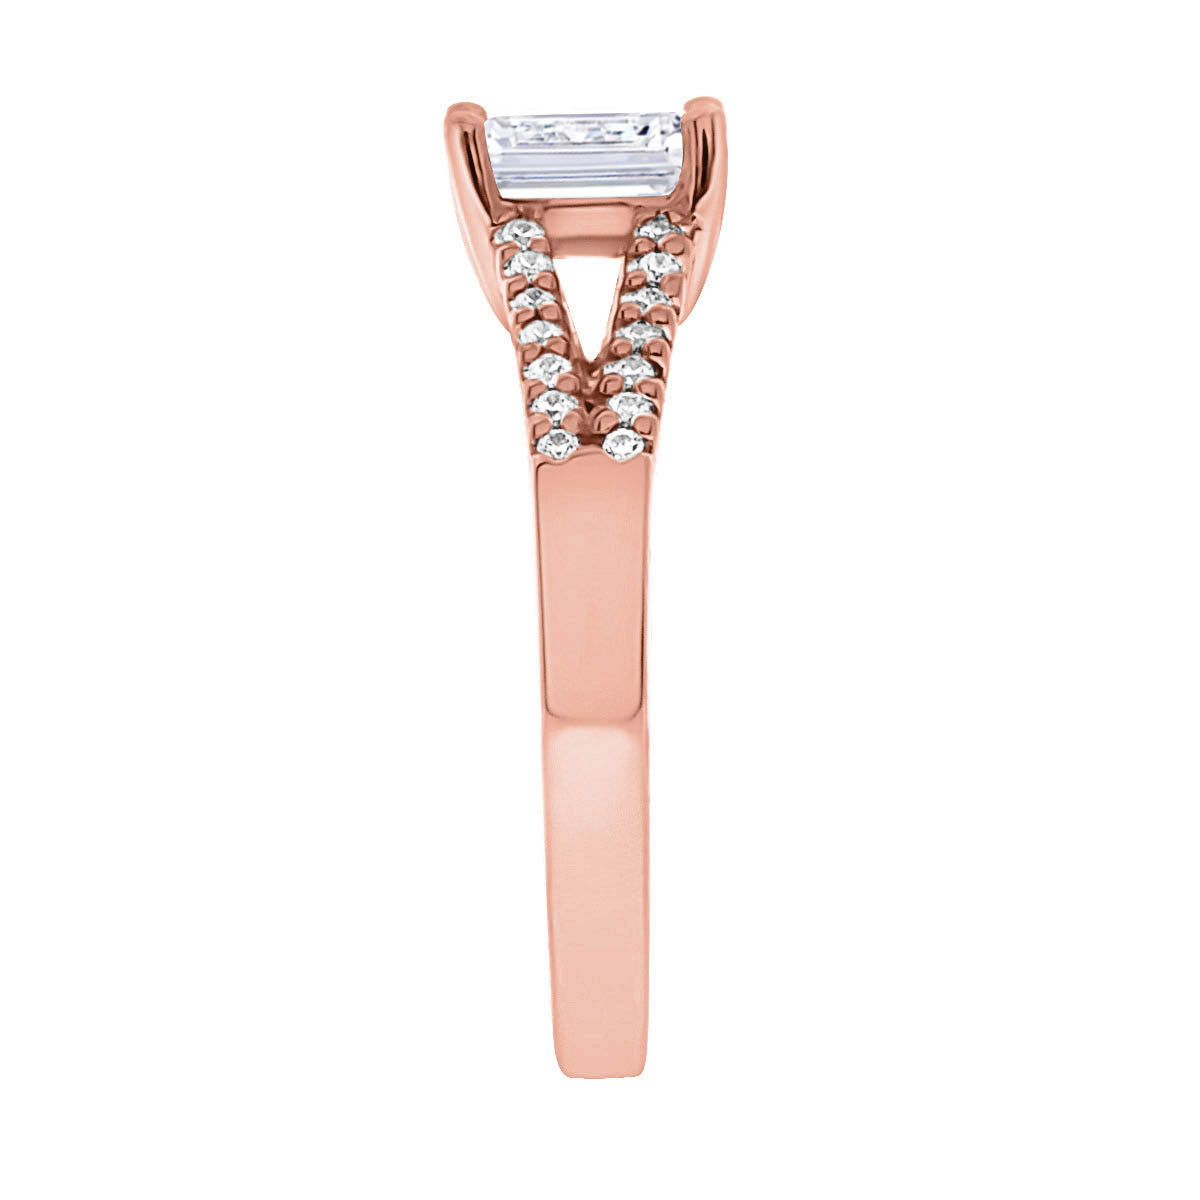 Radiant Cut Diamond Ring in rose gold end view